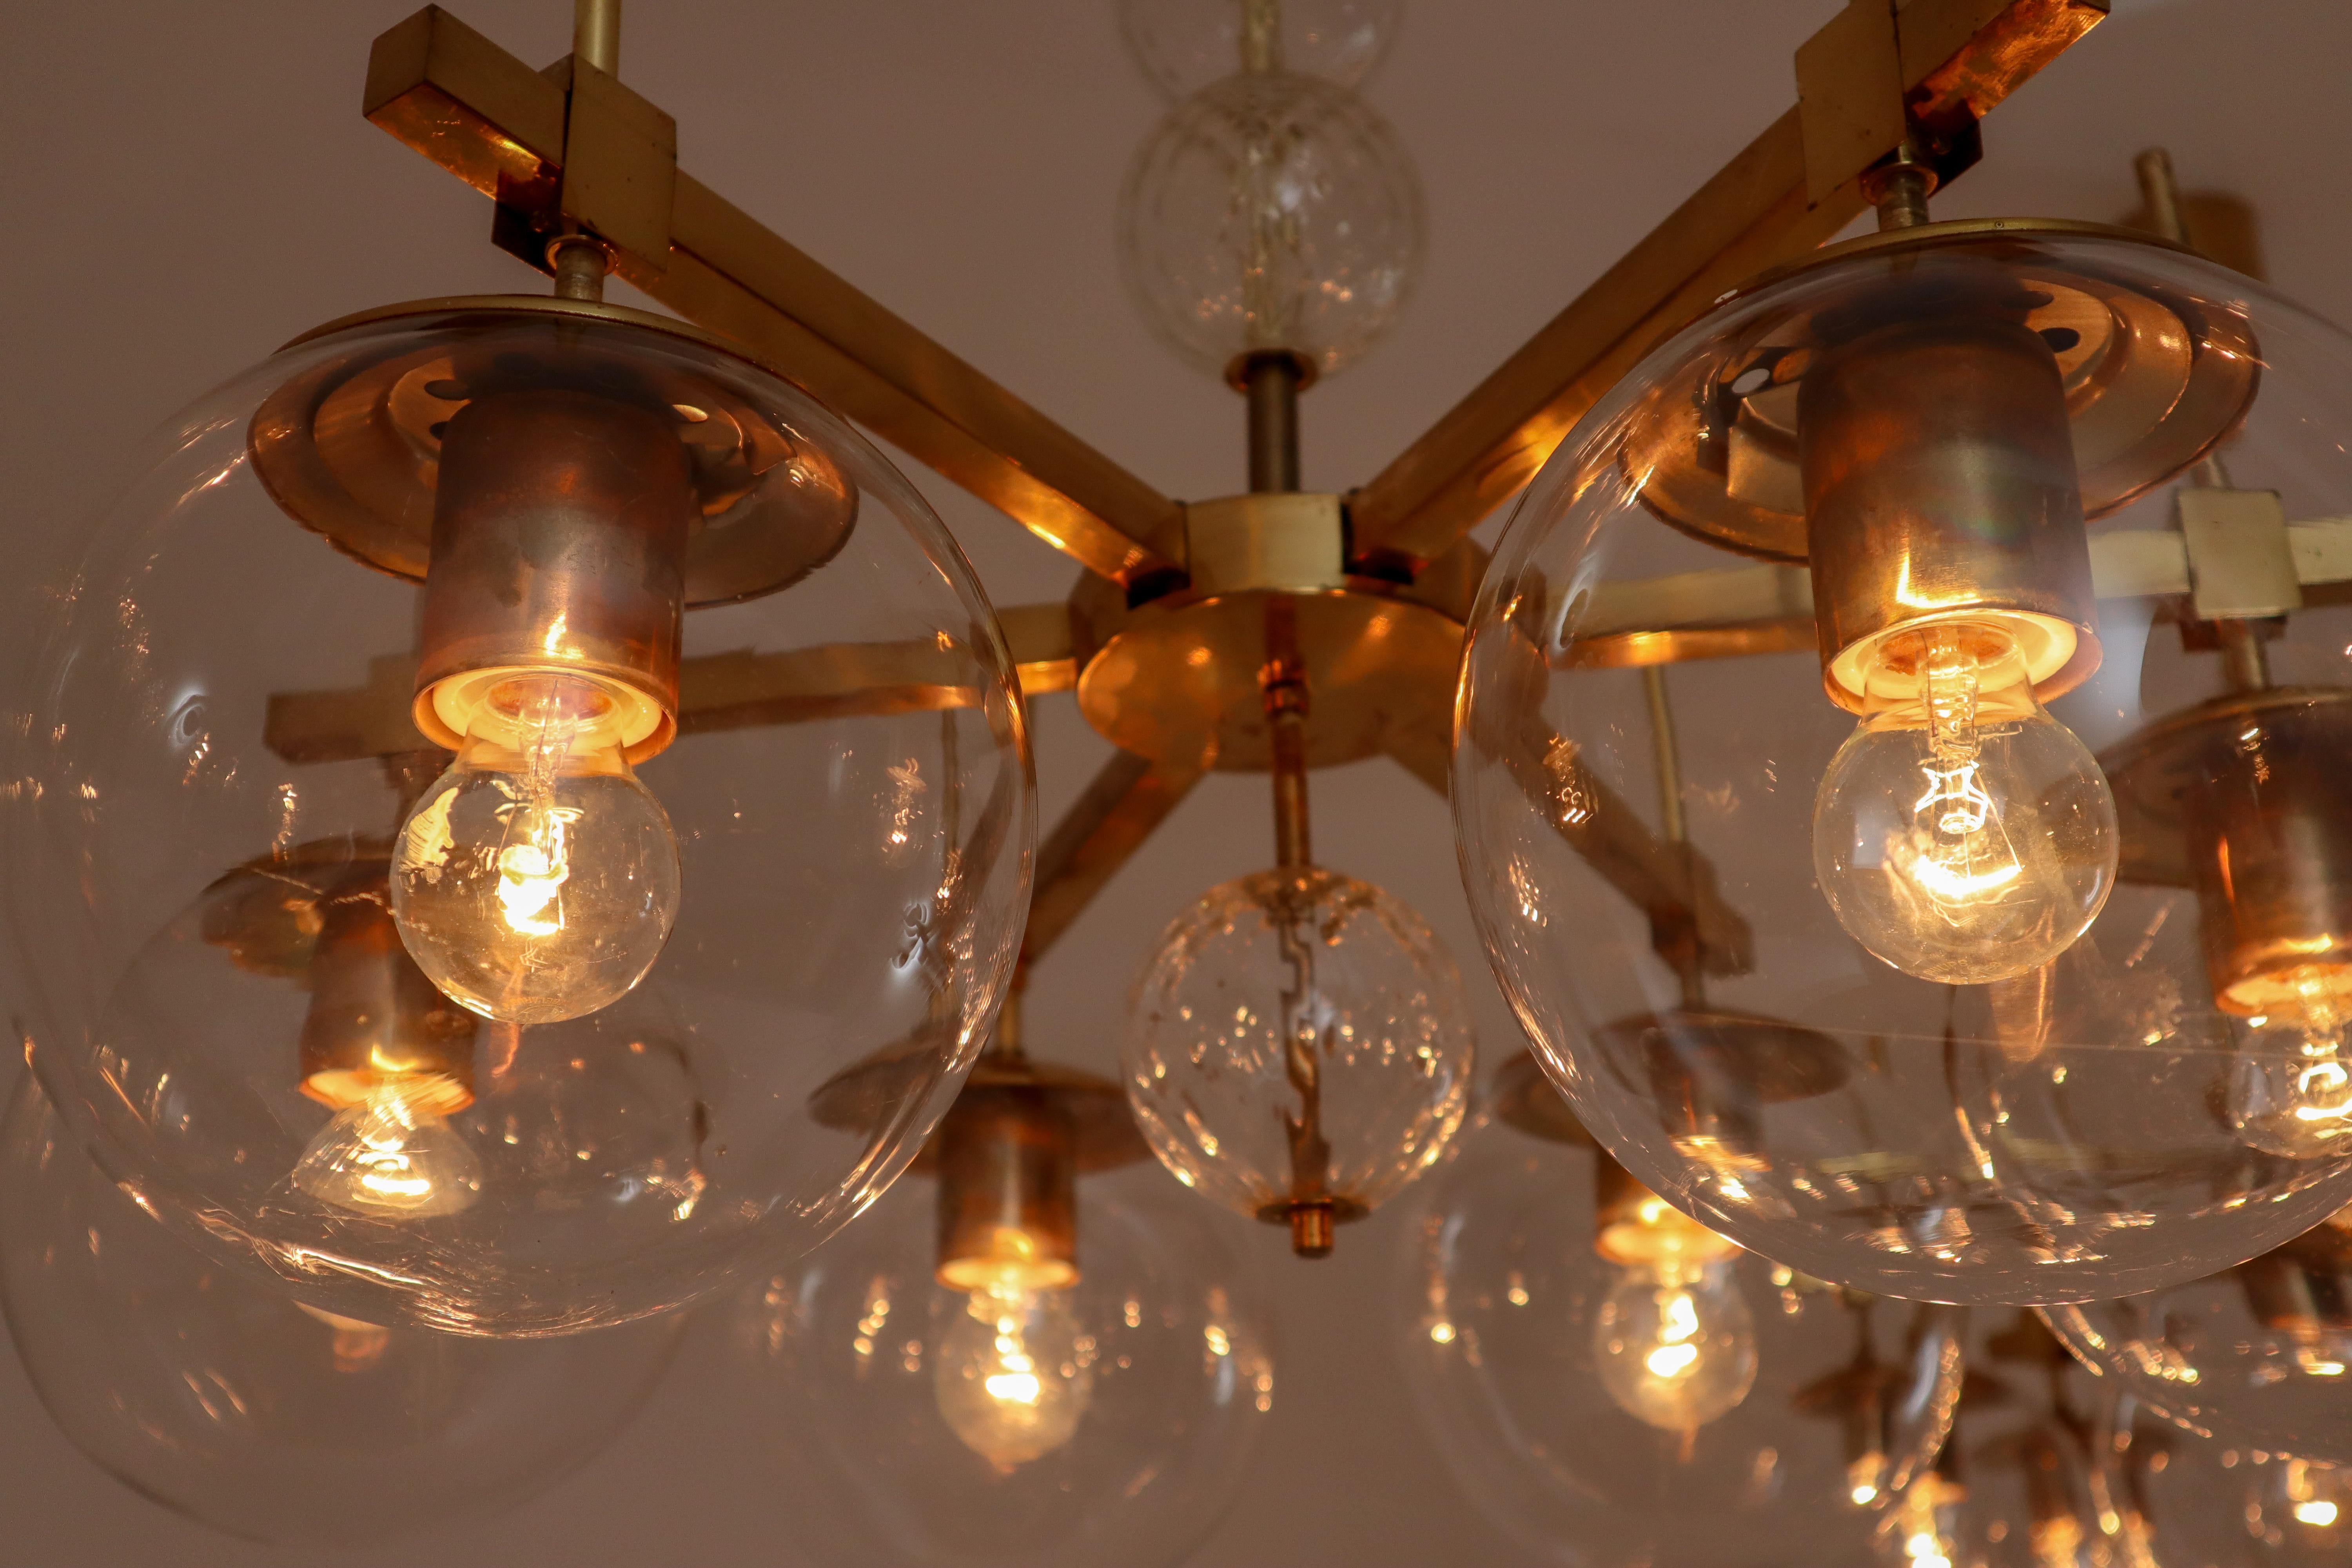 Six Midcentury Chandeliers with Brass Fixture and Hand-Blown Glass, Europe 2